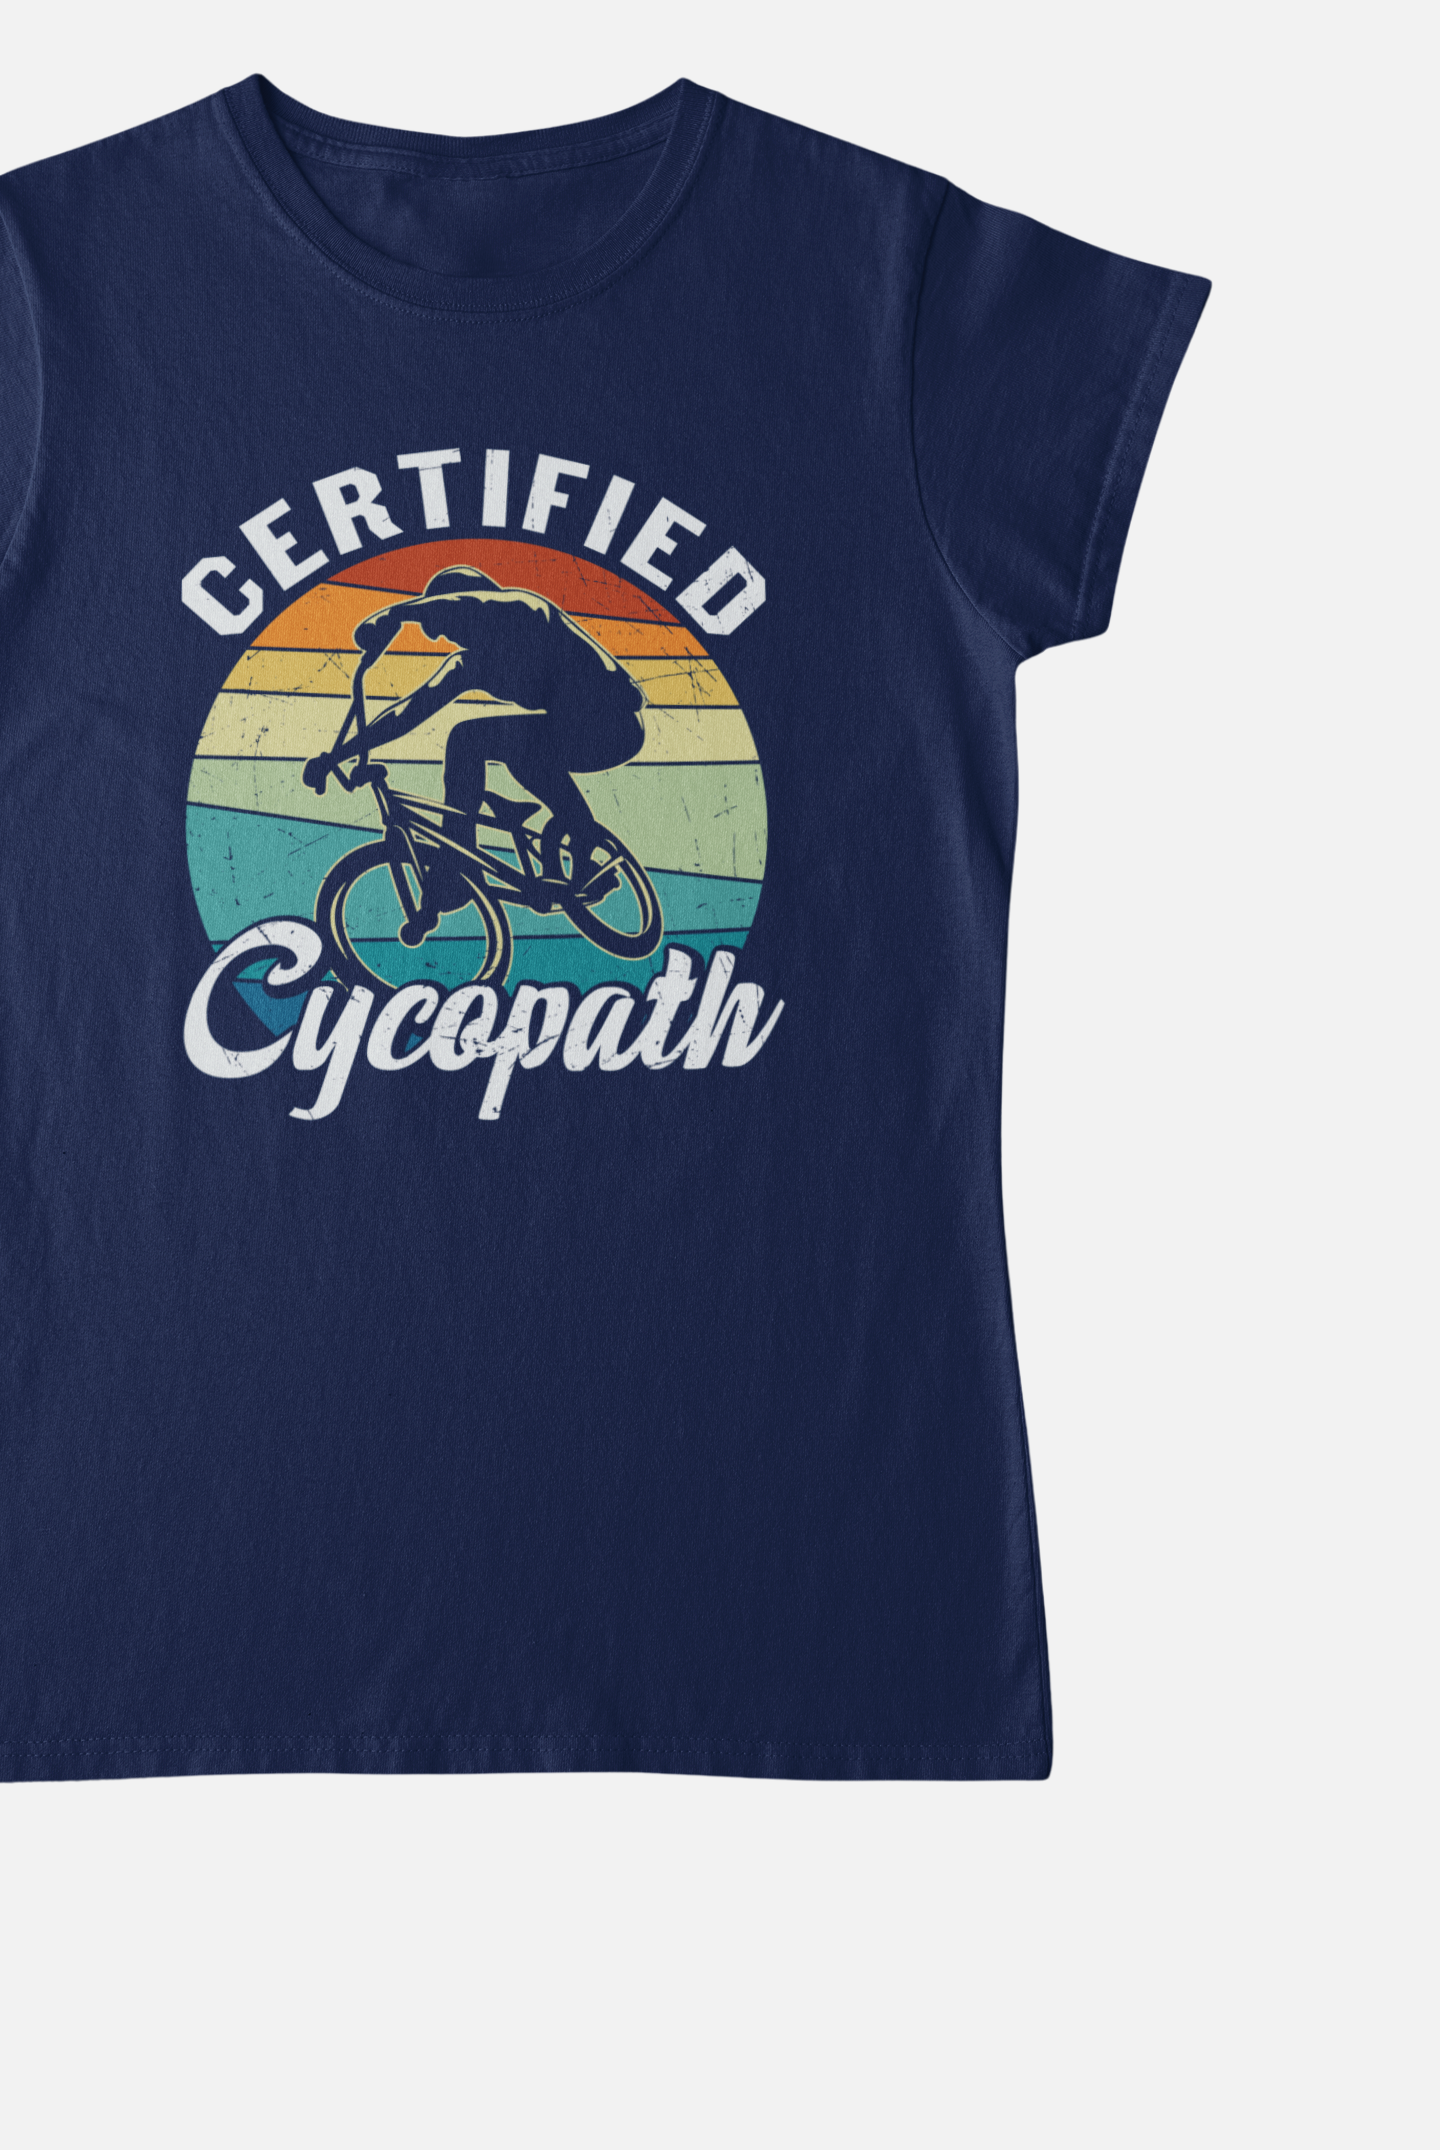 Certified Cycopath Navy Blue Round Neck T-Shirt for Women